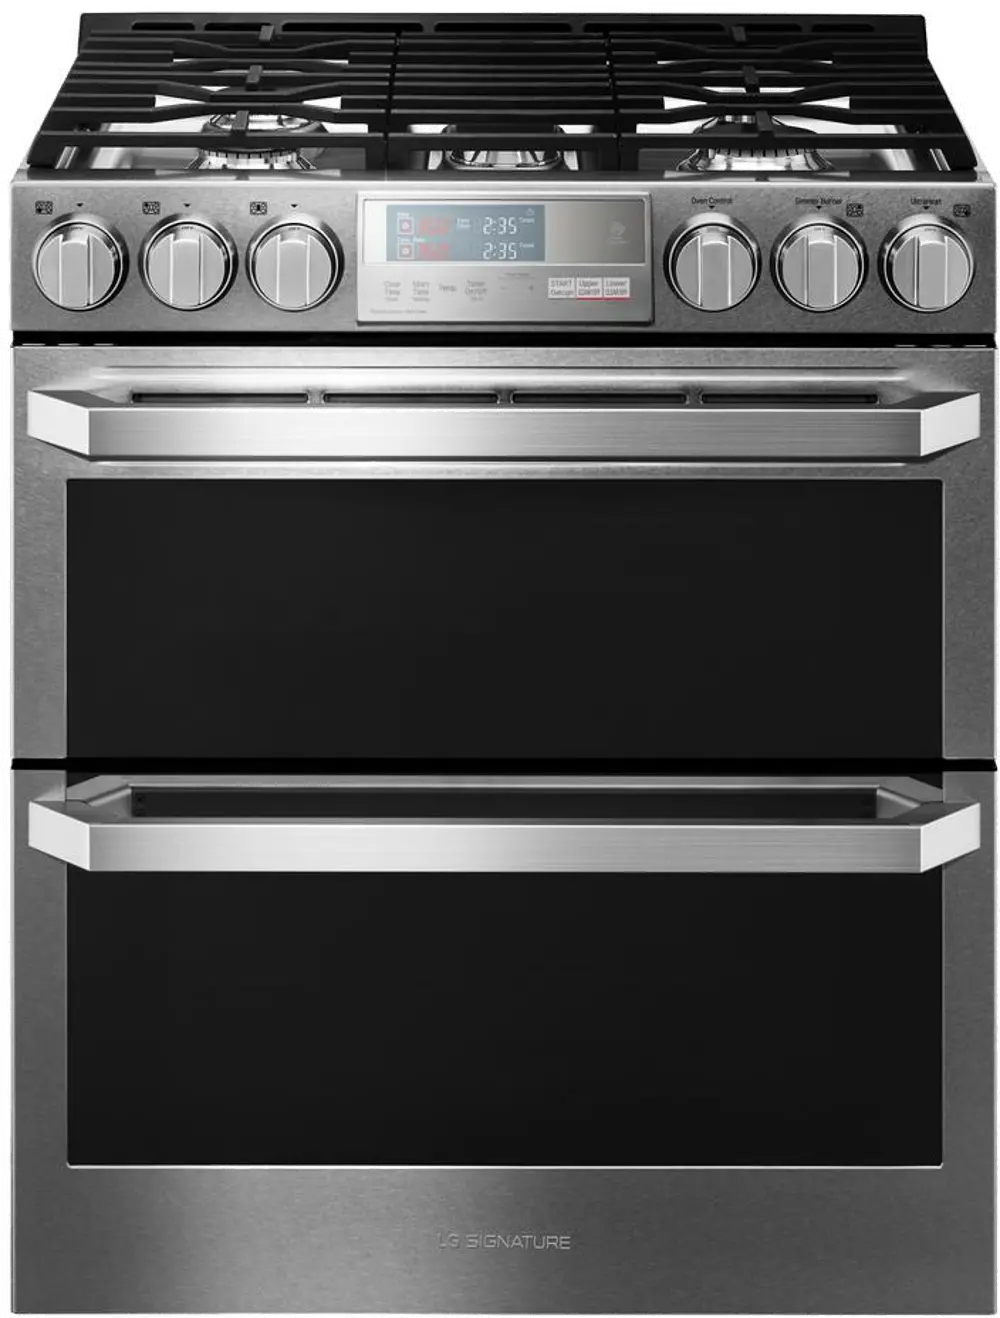 LUTG4519SN LG Signature Slide-in Gas Range with Double Oven - Textured Steel-1